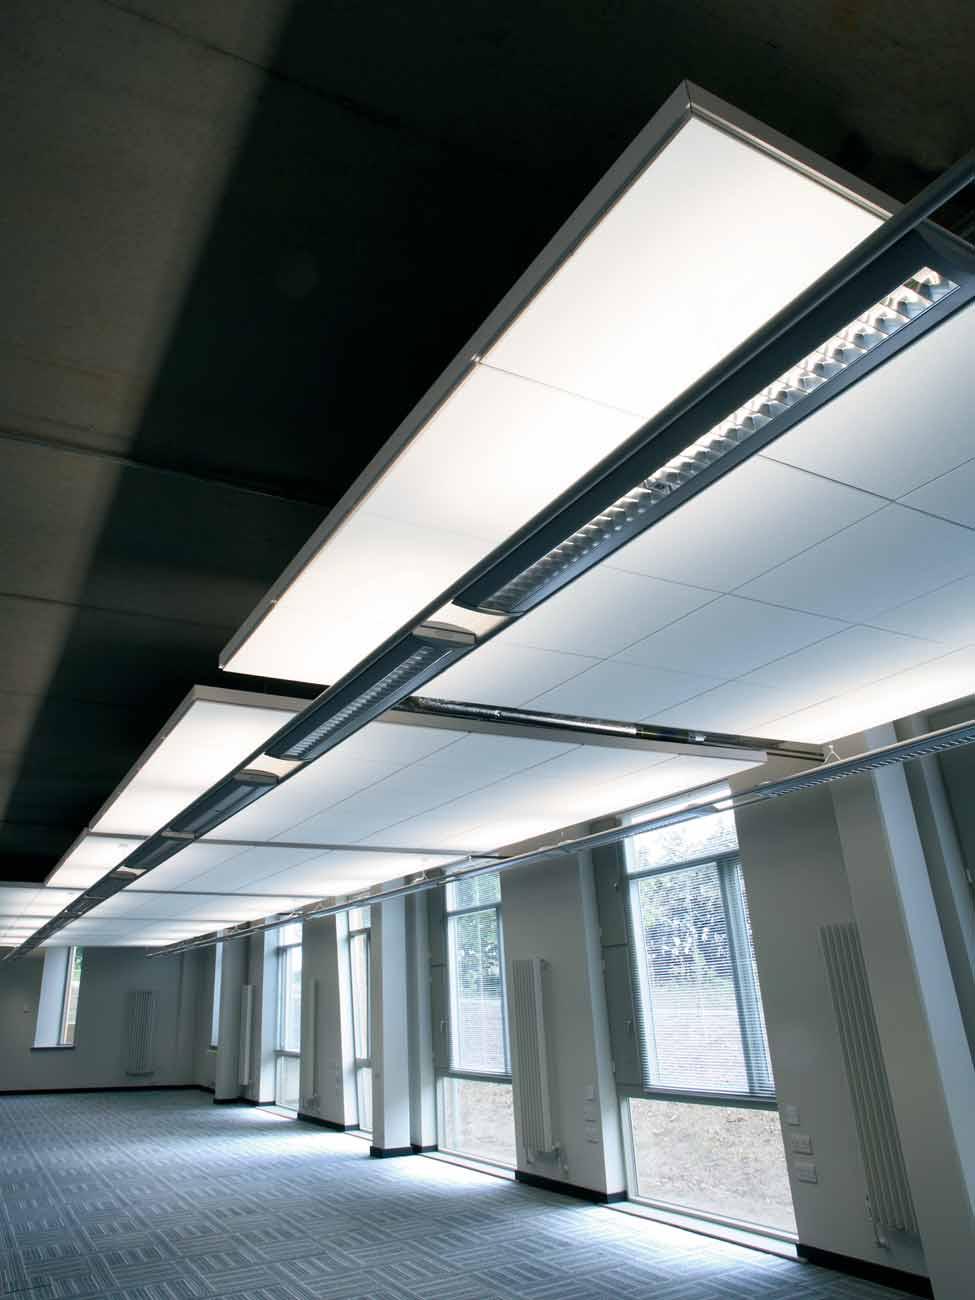 New Retrofit Acoustic Design Meeting Room Open Space Save energy by increasing natural light